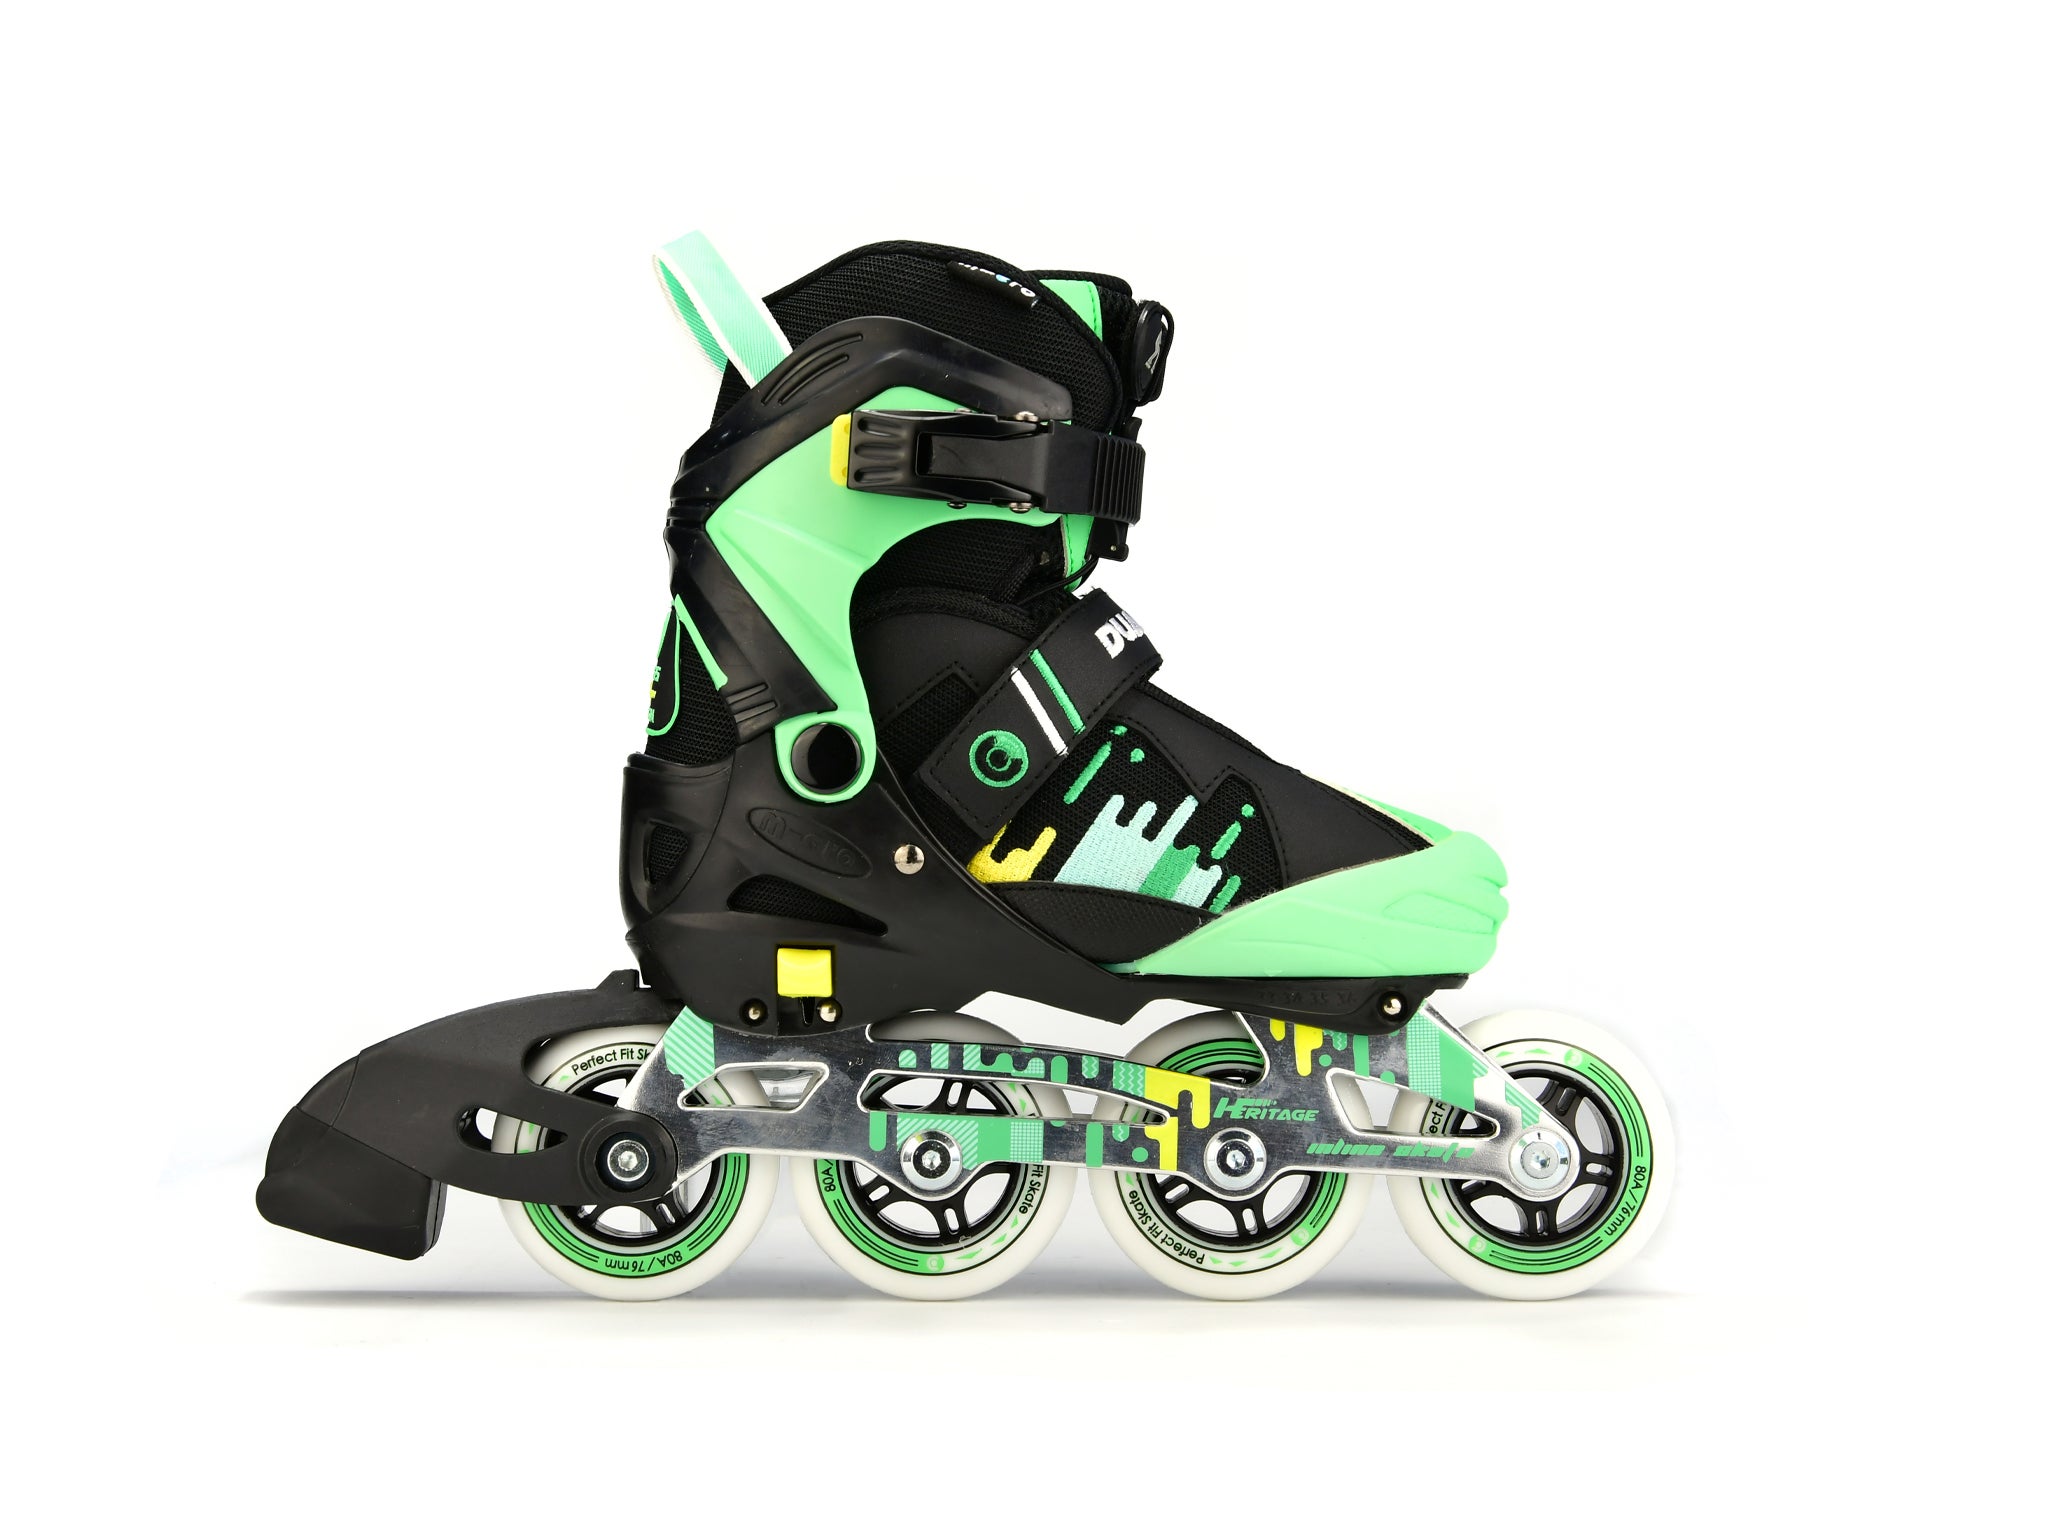 MOSILA Inline Skates Children Roller Skates for Girls and Boys Easily Adjustable,Fits US Kids Size 3-5,6-8 Expands As Your Child Grows-Light Up Front Wheel and Low Friction Wheels 